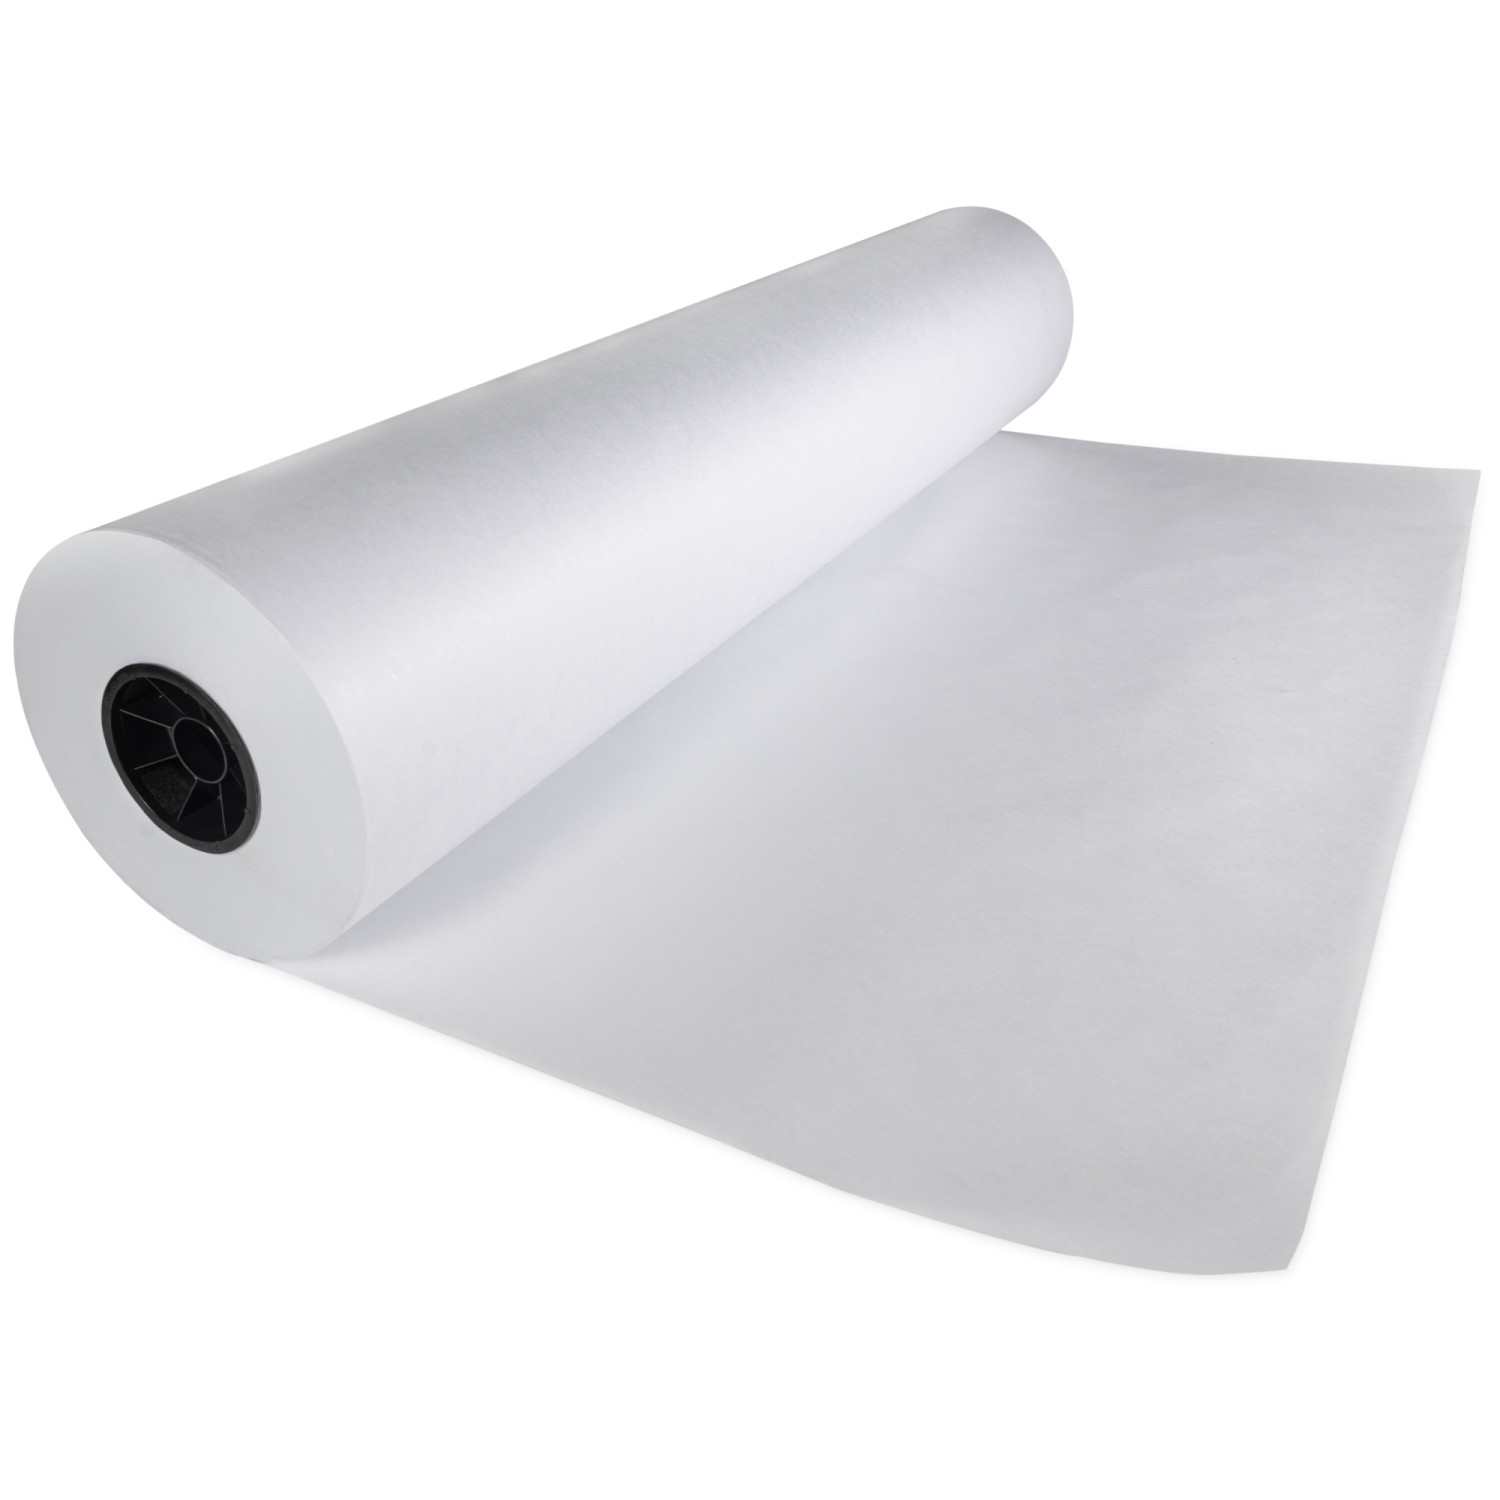 36 x 1000' White Butcher Paper Roll for Wrapping Meat and Fish buy in  stock in U.S. in IDL Packaging